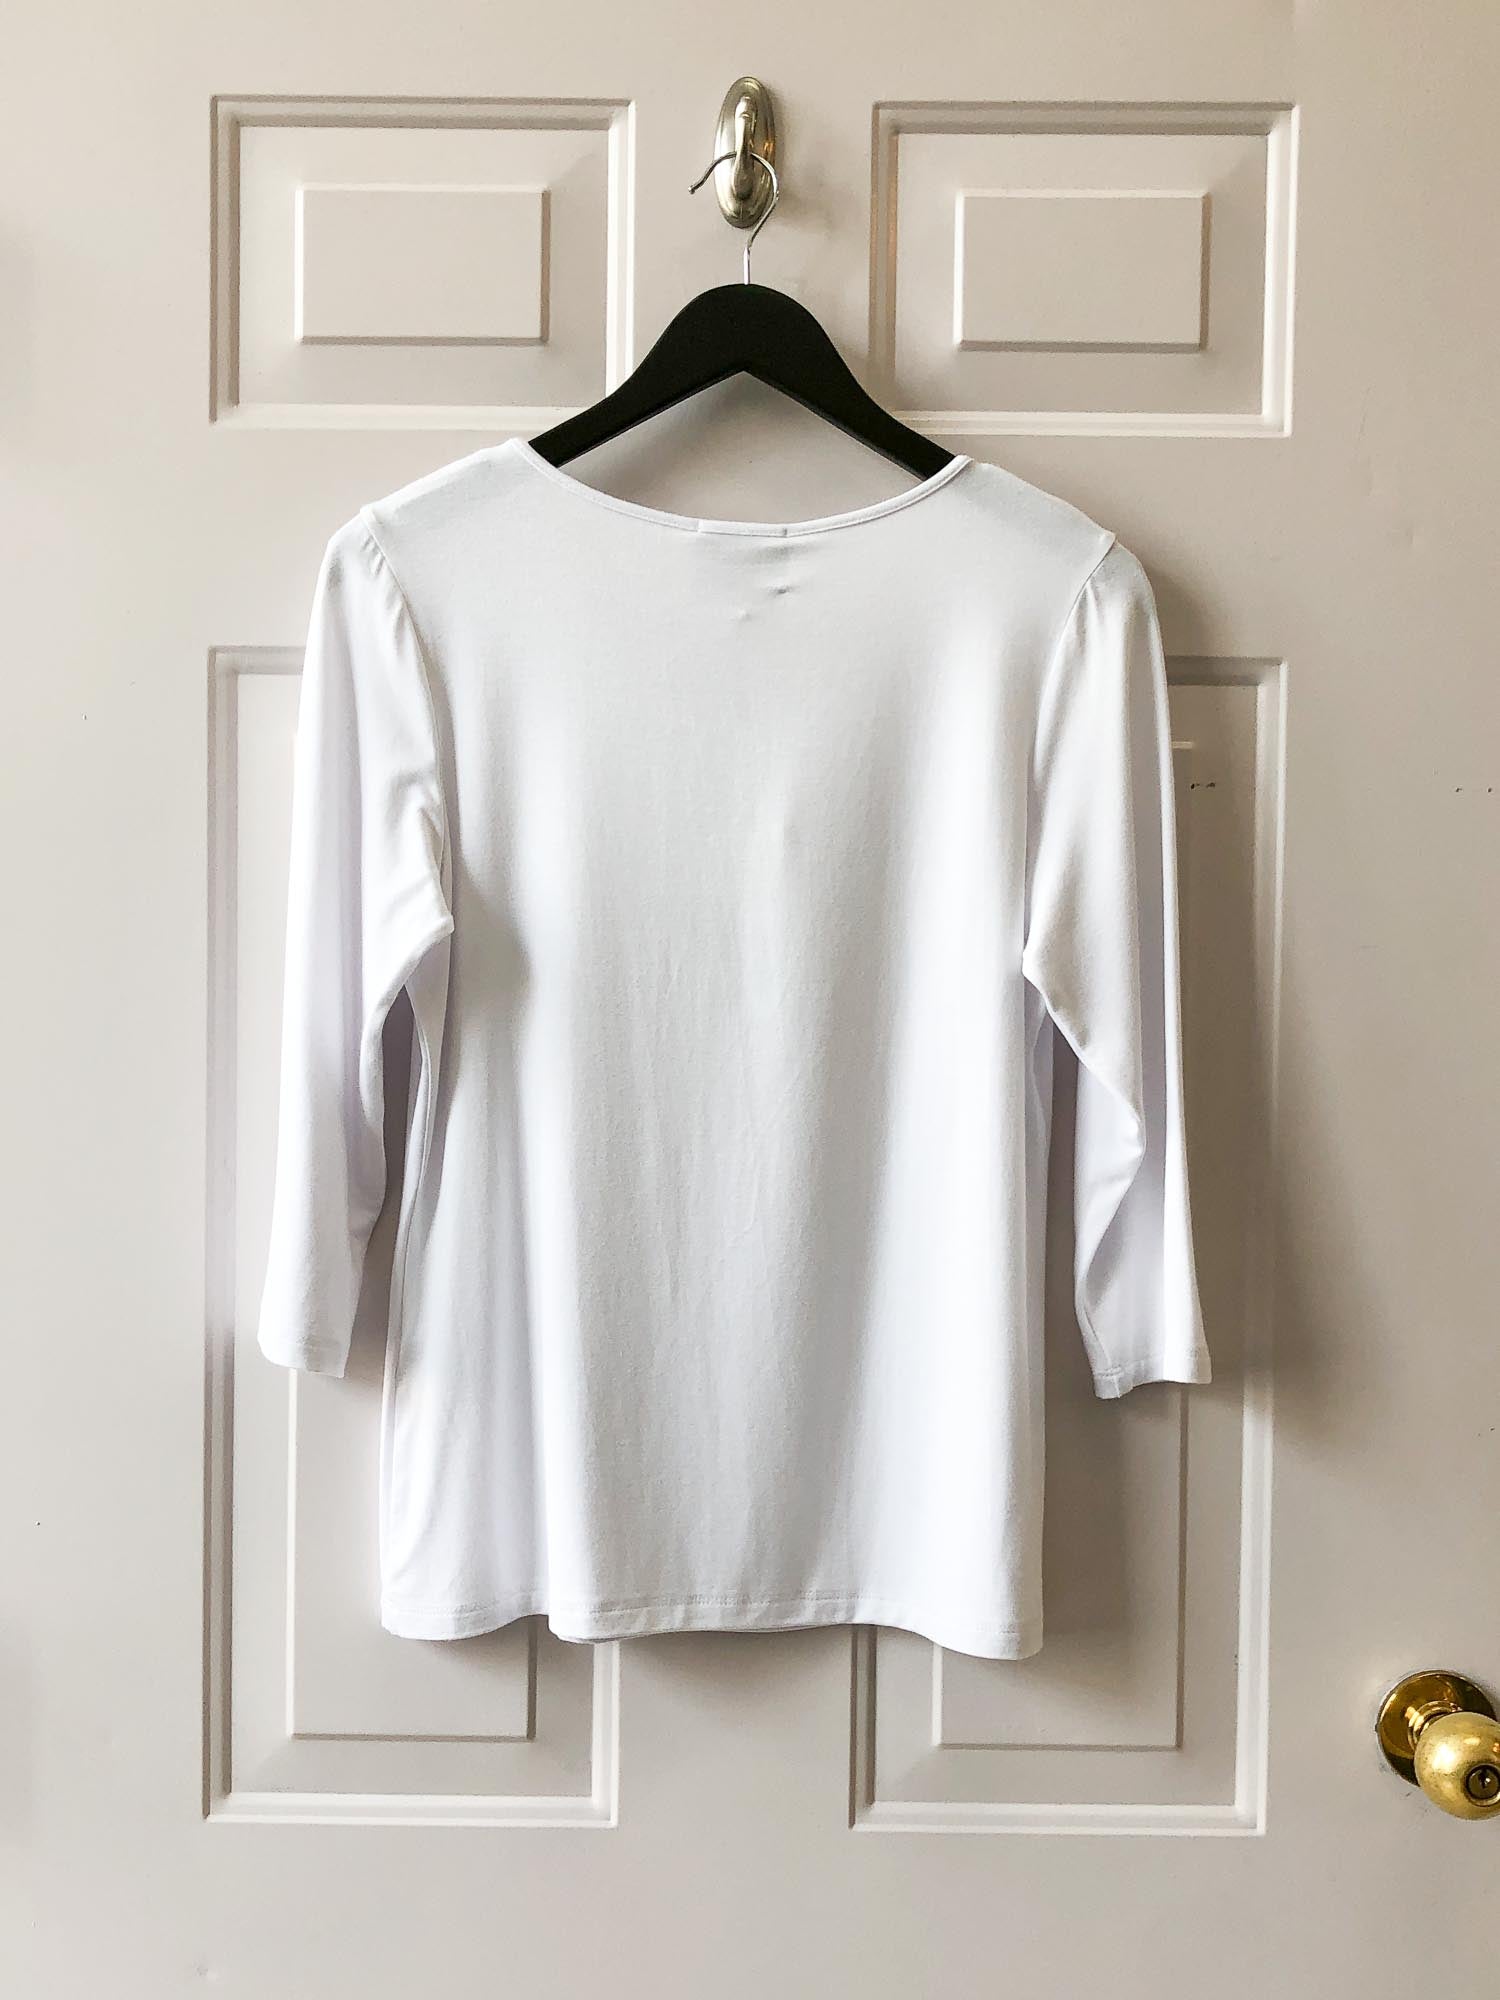 Chalet et ceci Jersey 3/4 Sleeve Basic Top, White